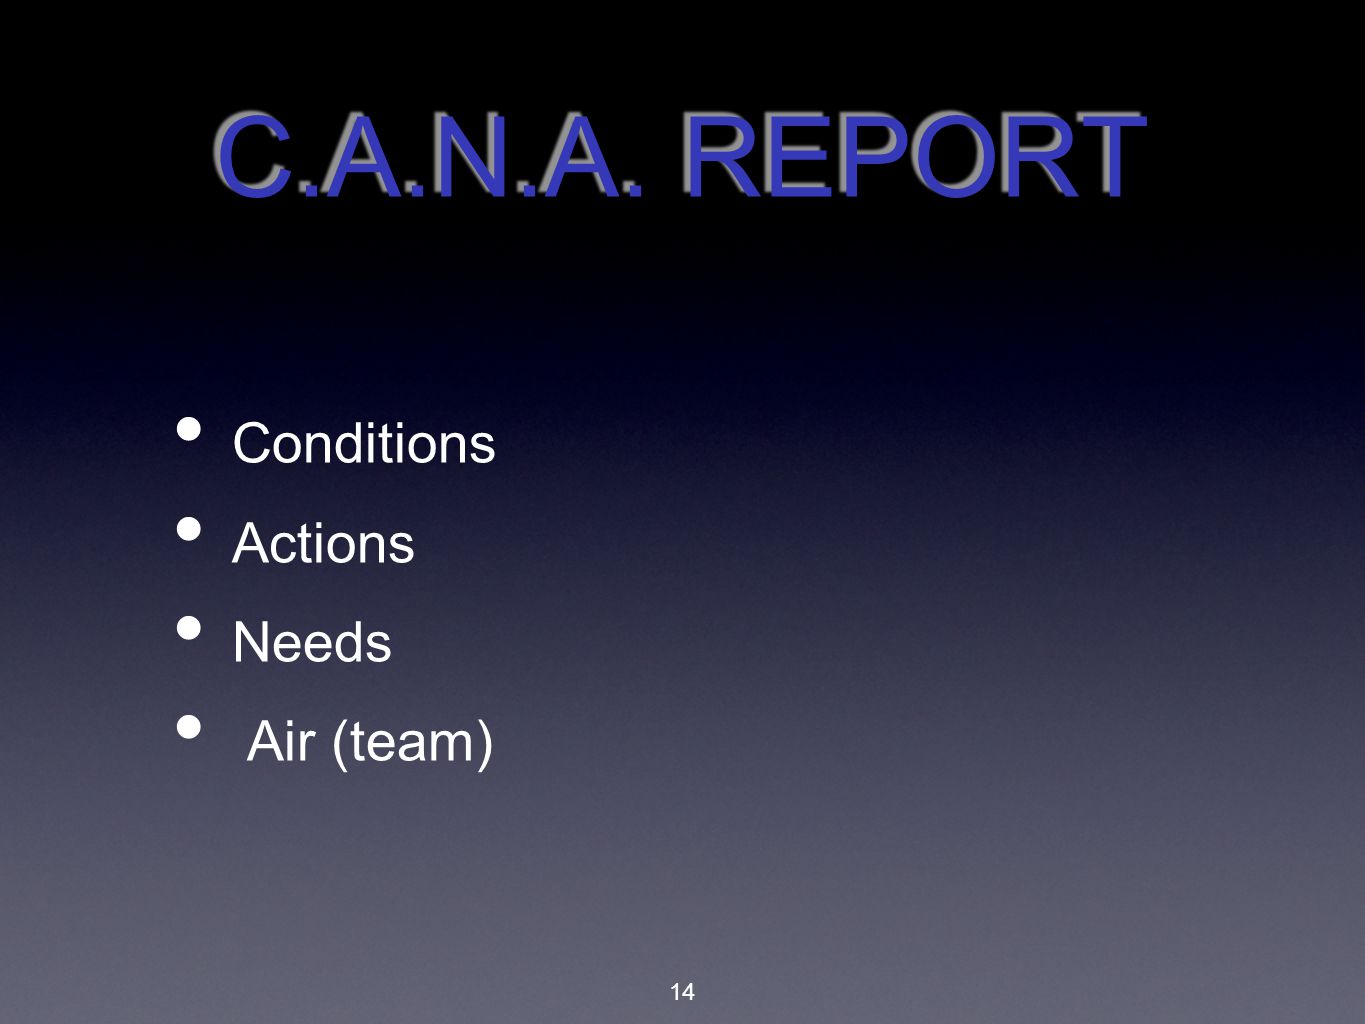 C.A.N.A. REPORT Conditions Actions Needs Air (team)